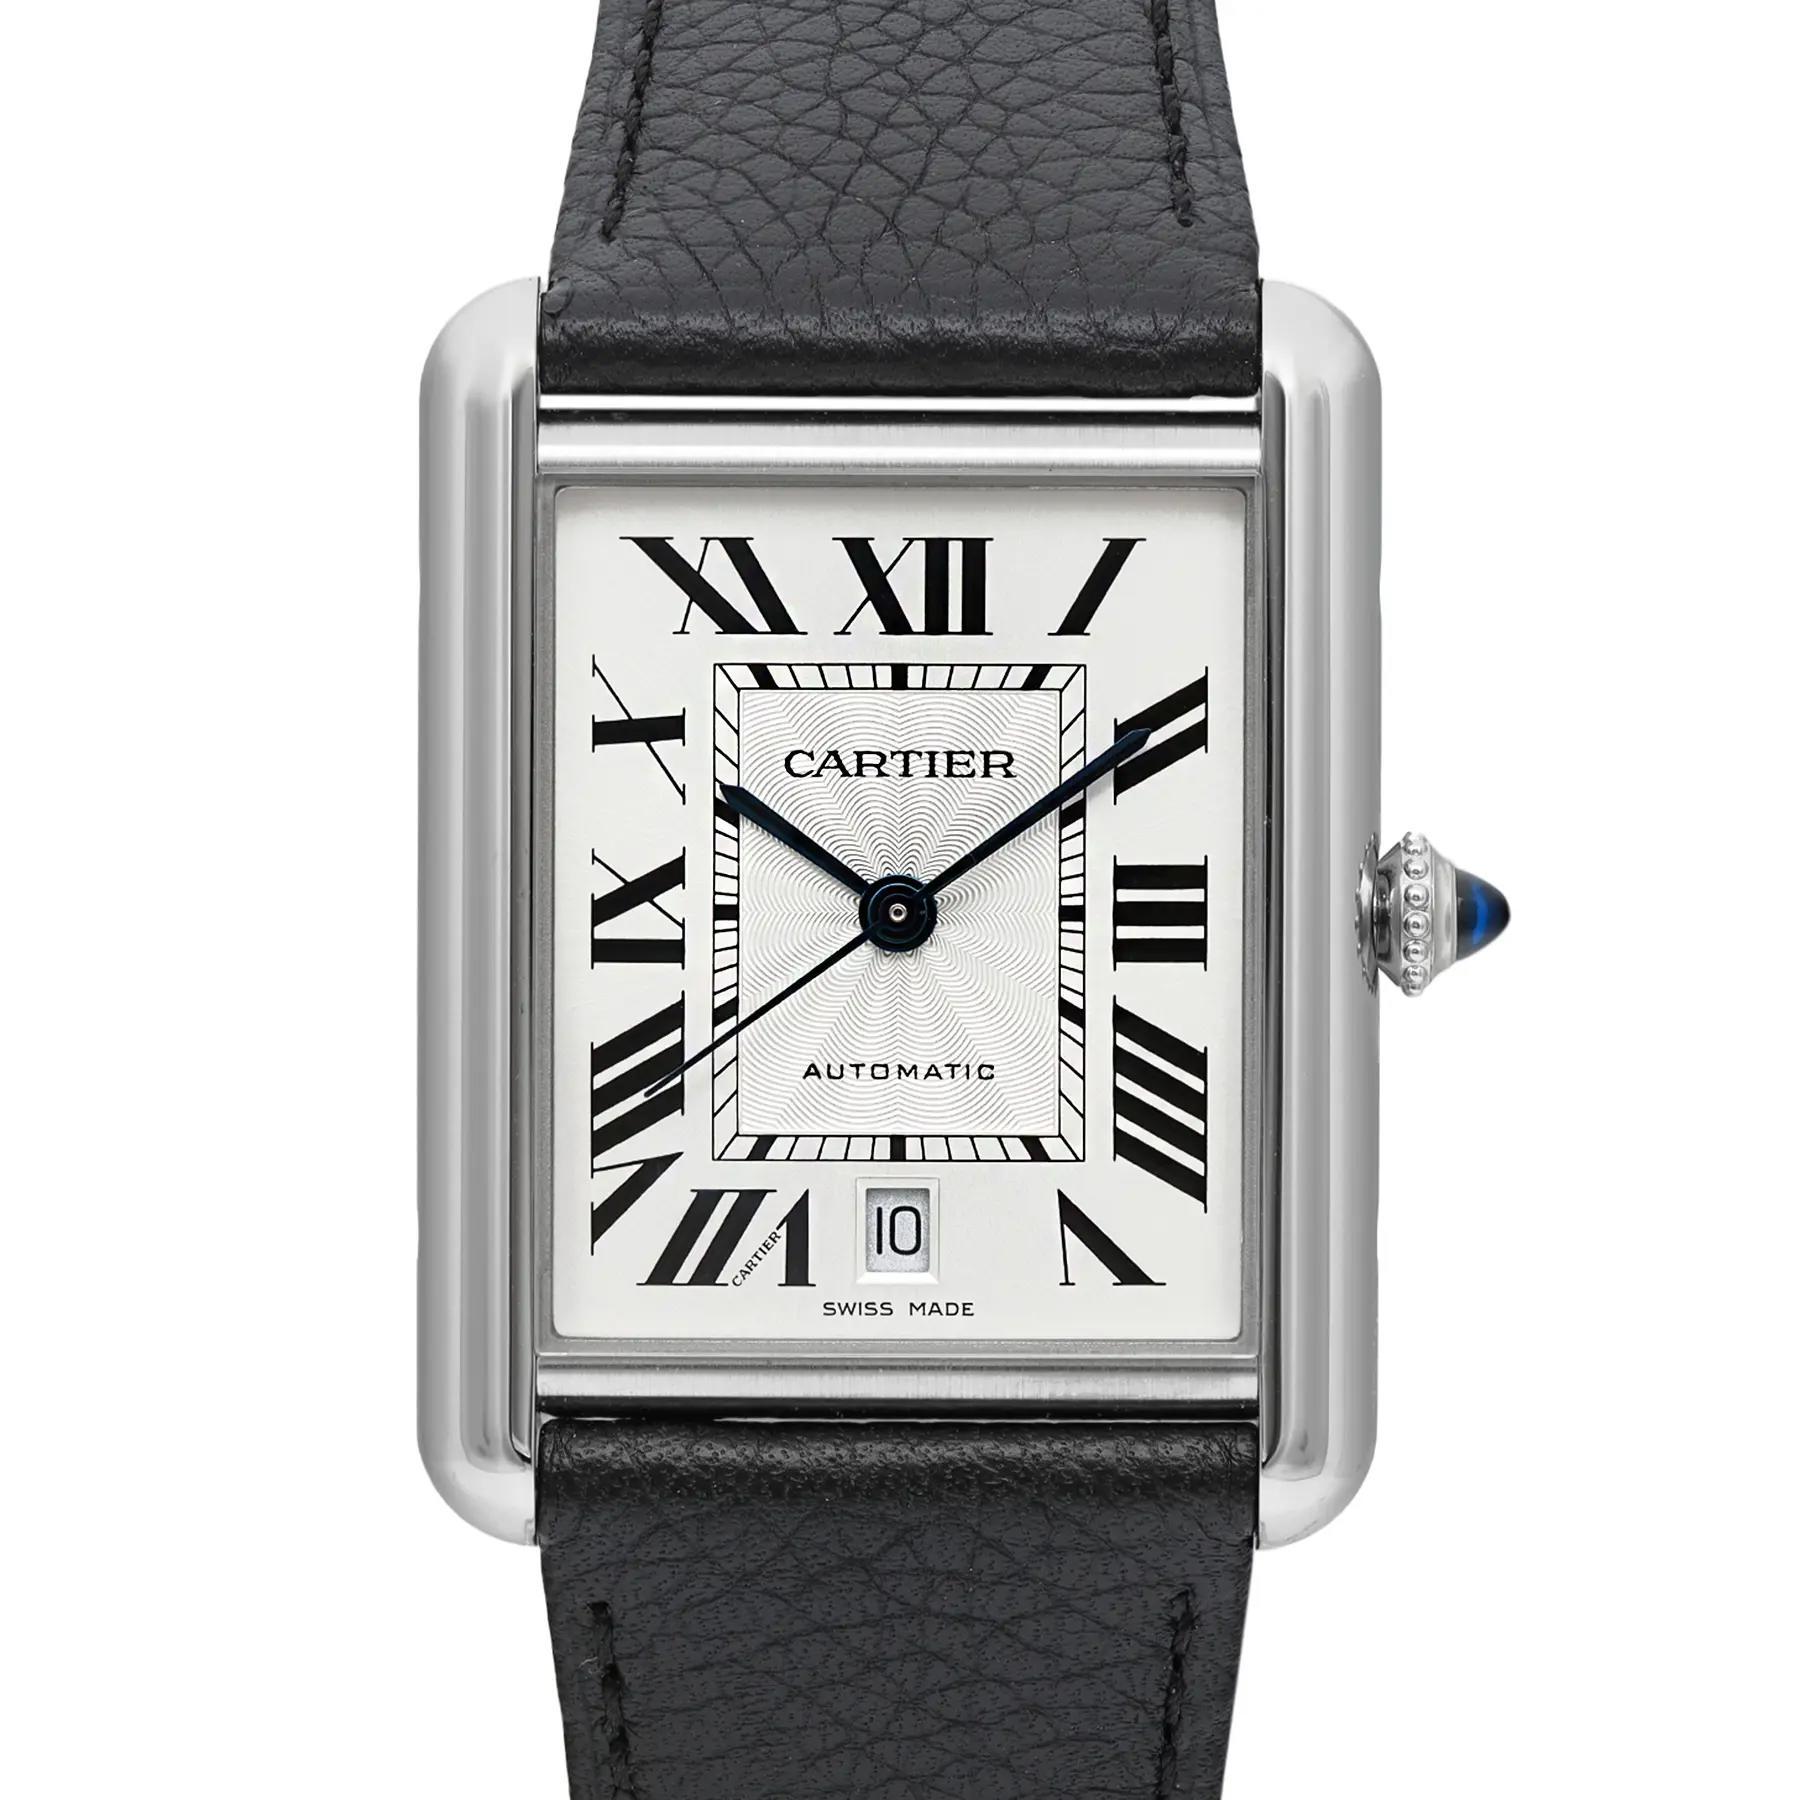 Pre-owned Like New. No box and original box. Comes with the gift box.

Brand: Cartier
Model Number: WSTA0040
Department: Men
Country/Region of Manufacture: Switzerland
Style: Casual
Model Name: Cartier Tank Must
Vintage: No

Movement:
Type: